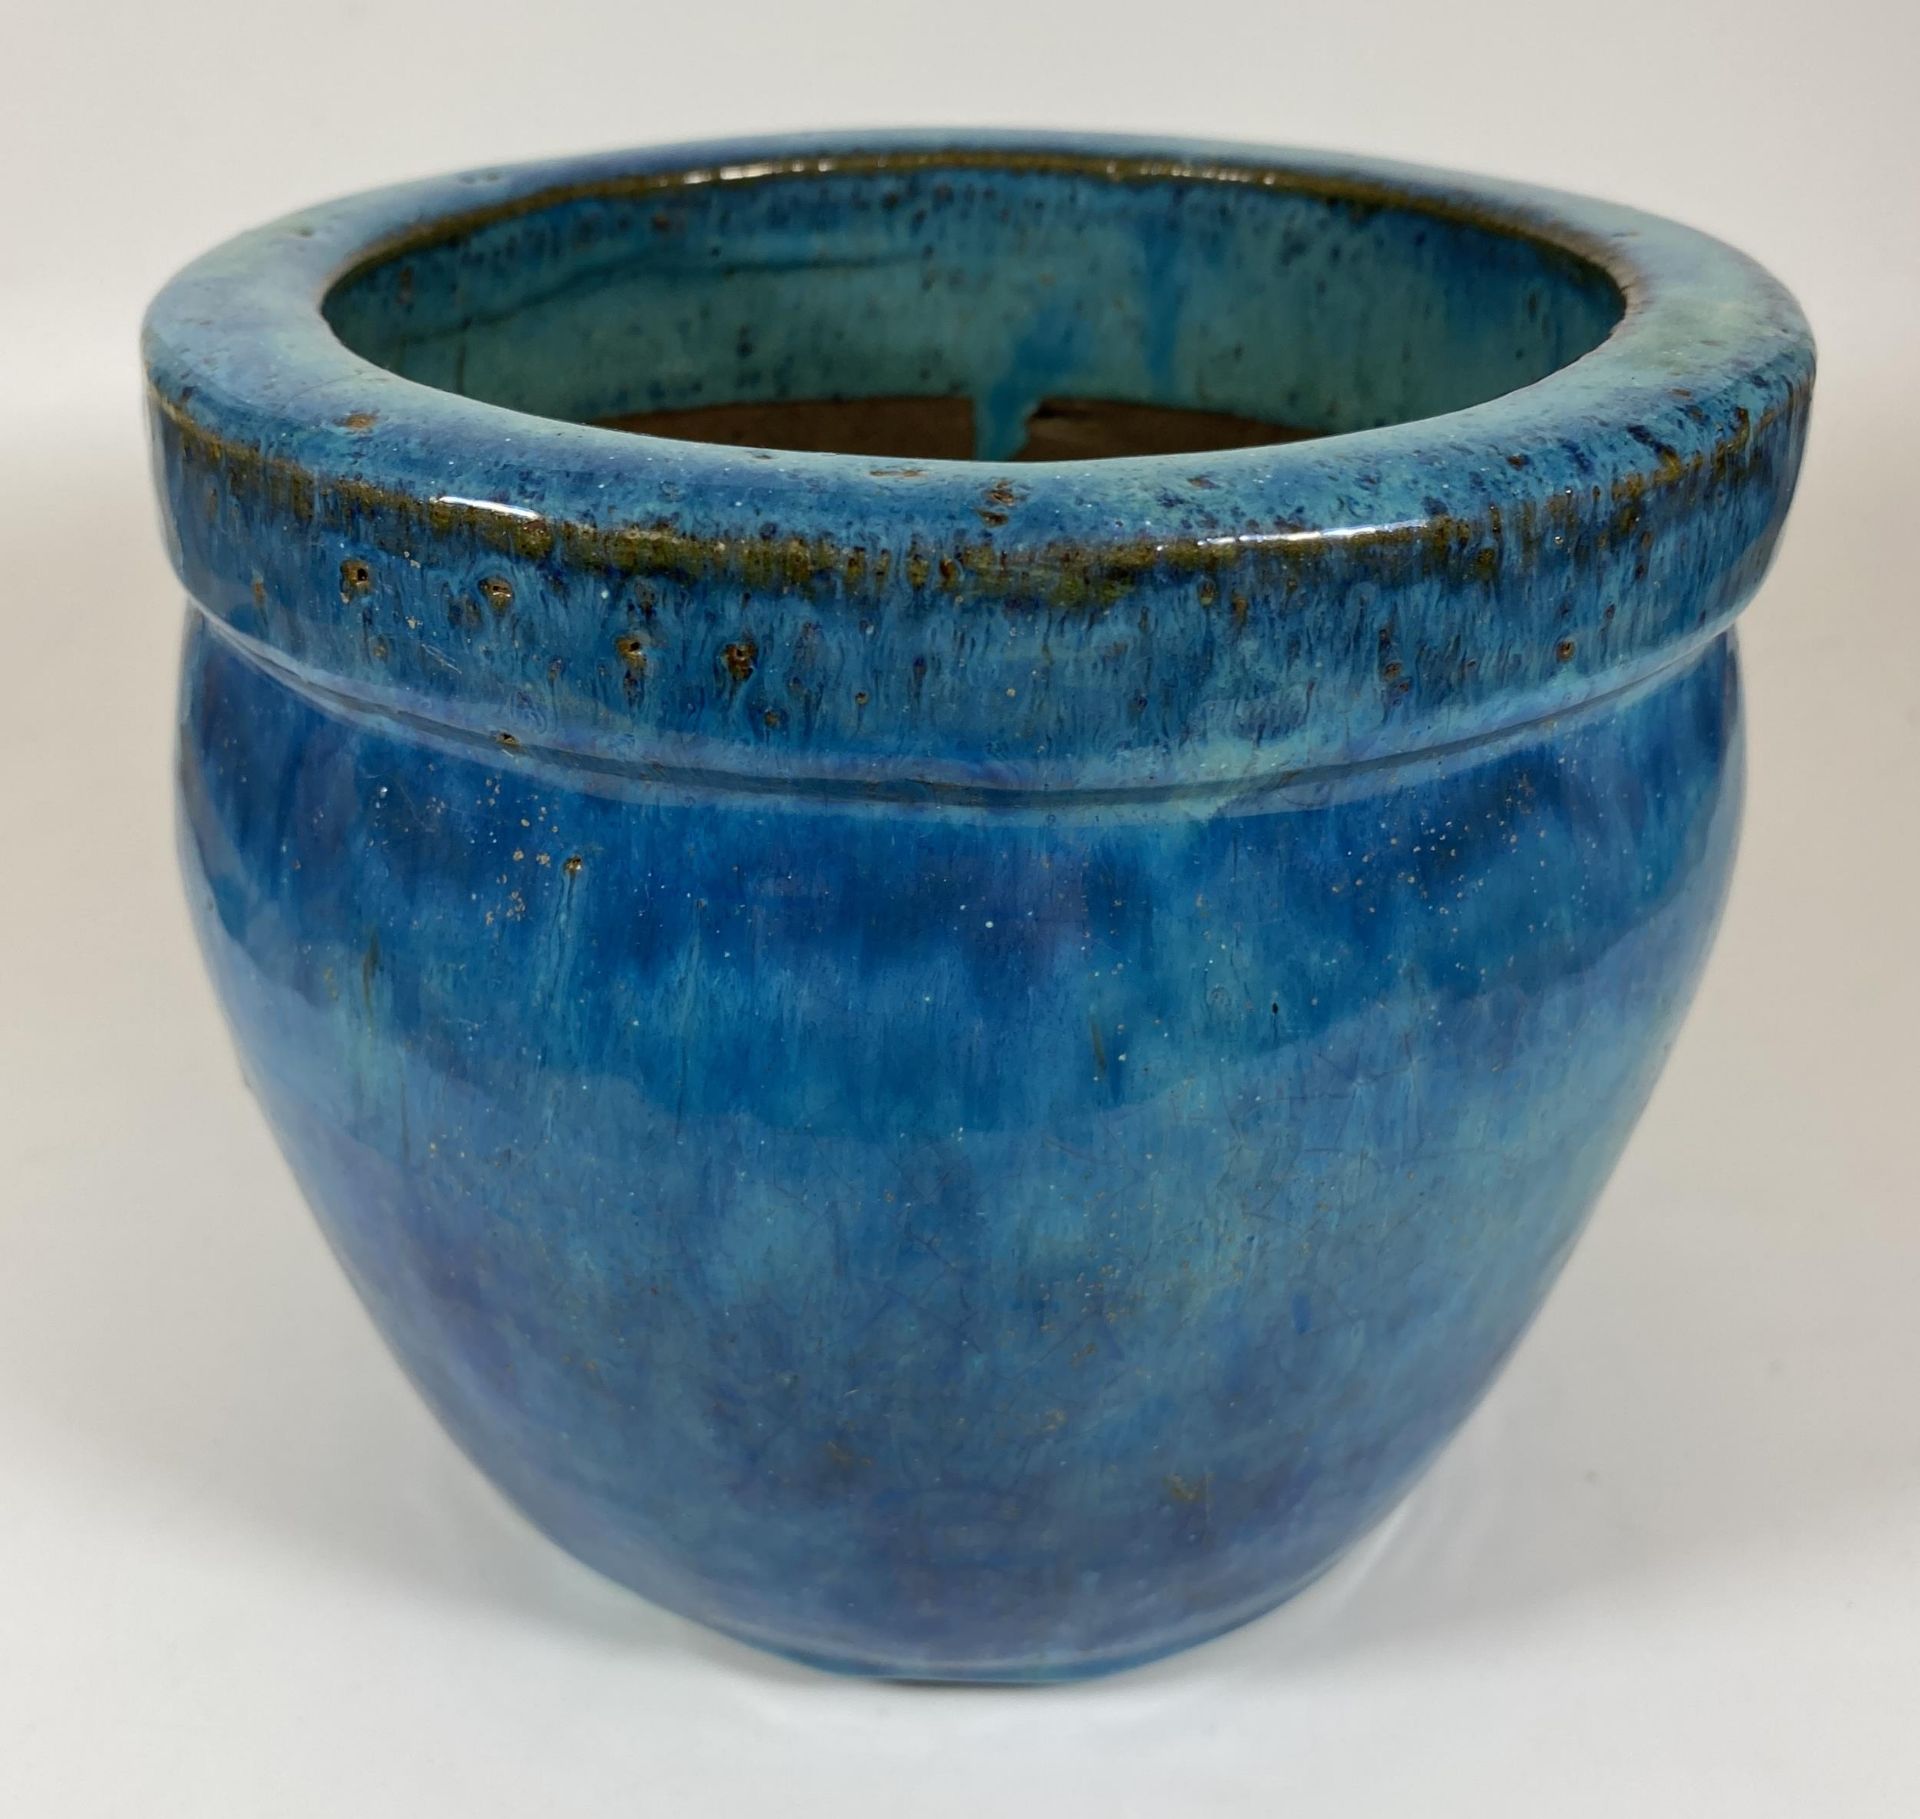 A 20TH CENTURY CHINESE TURQUOISE POTTERY PLANTER, HEIGHT 15CM